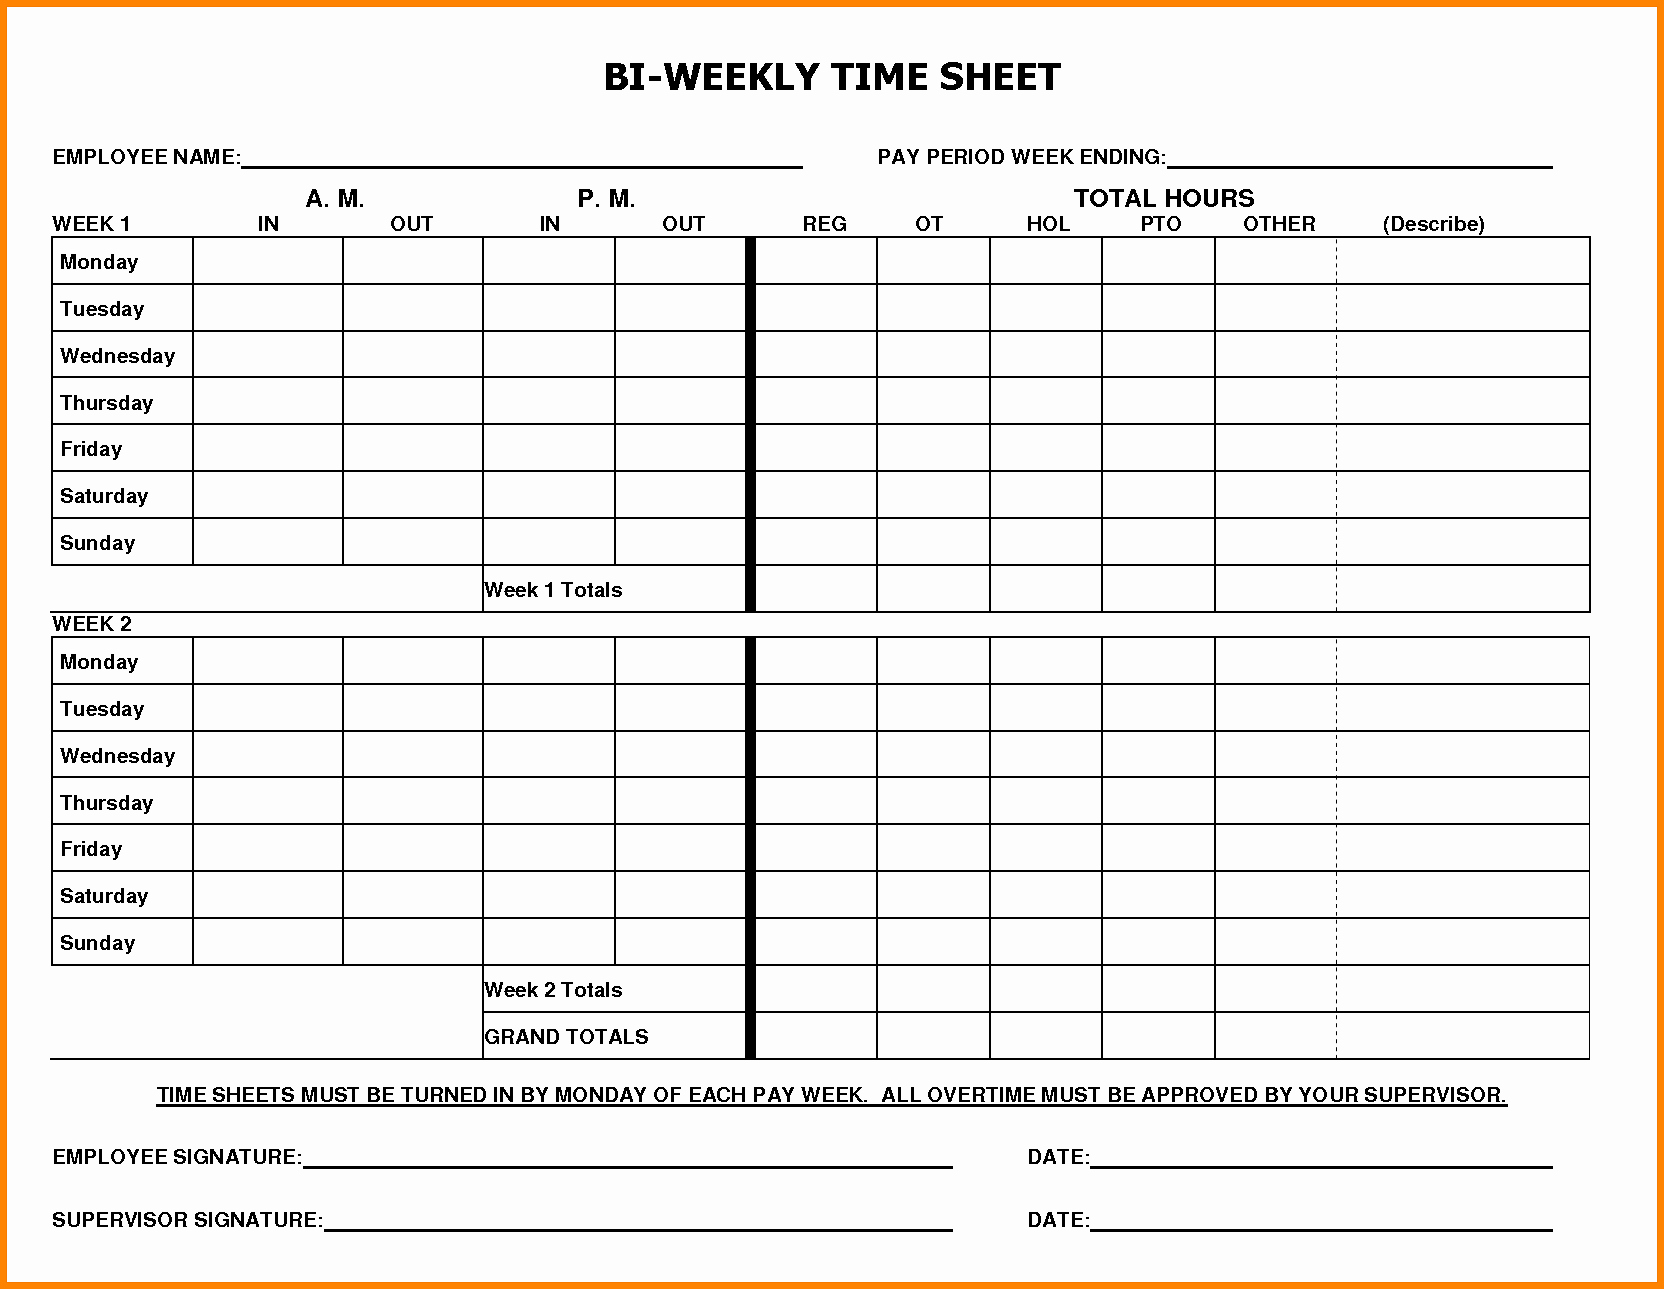 Weekly Time Sheet Template New Bi Weekly Timesheet Template Gallery Professional Report